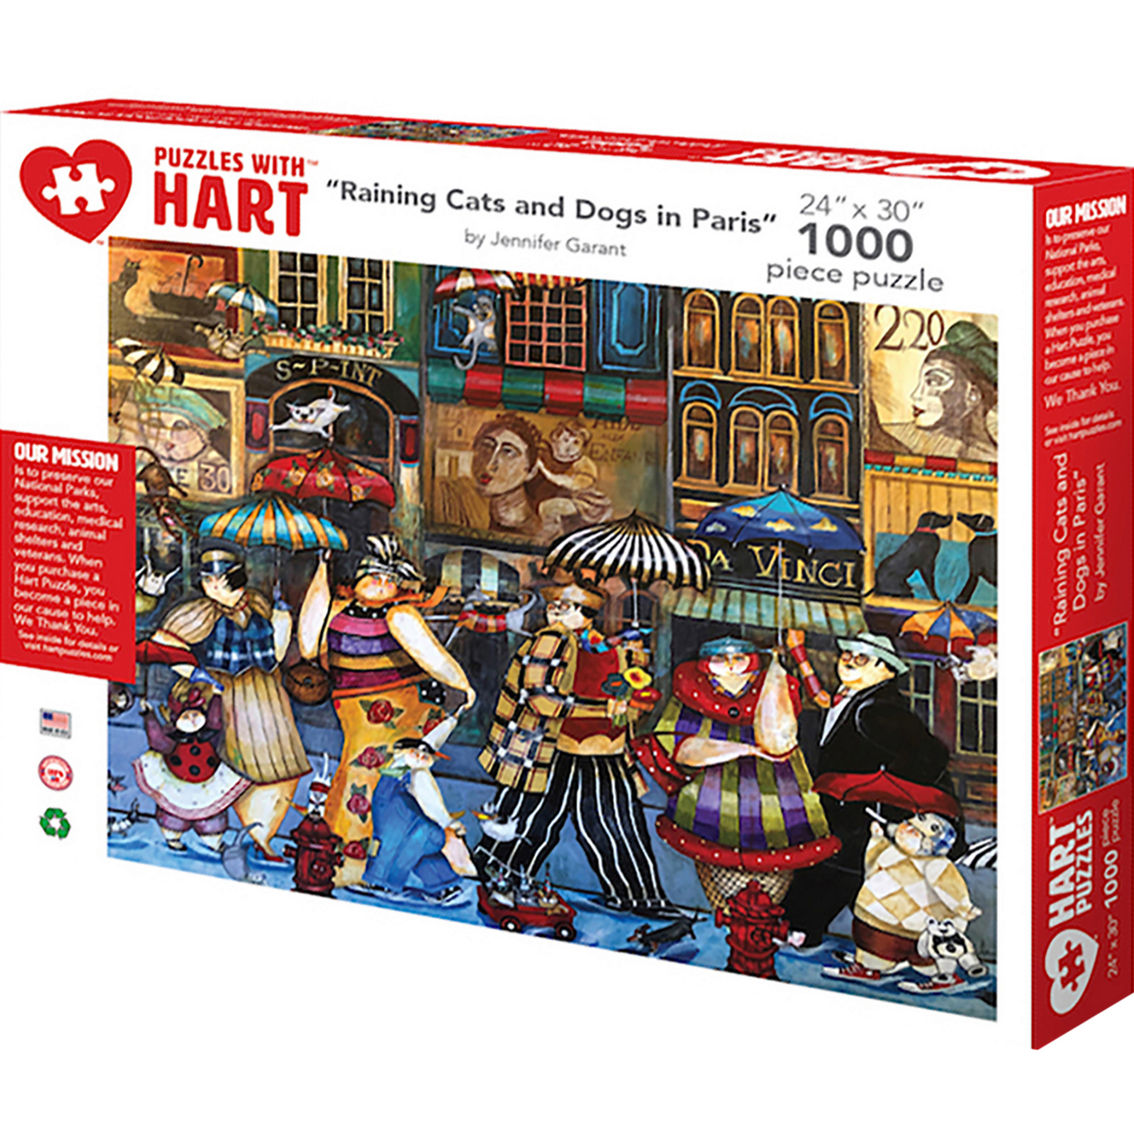 Hart Puzzles Raining Cats and Dogs in Paris 1,000 pc. Puzzle - Image 2 of 6